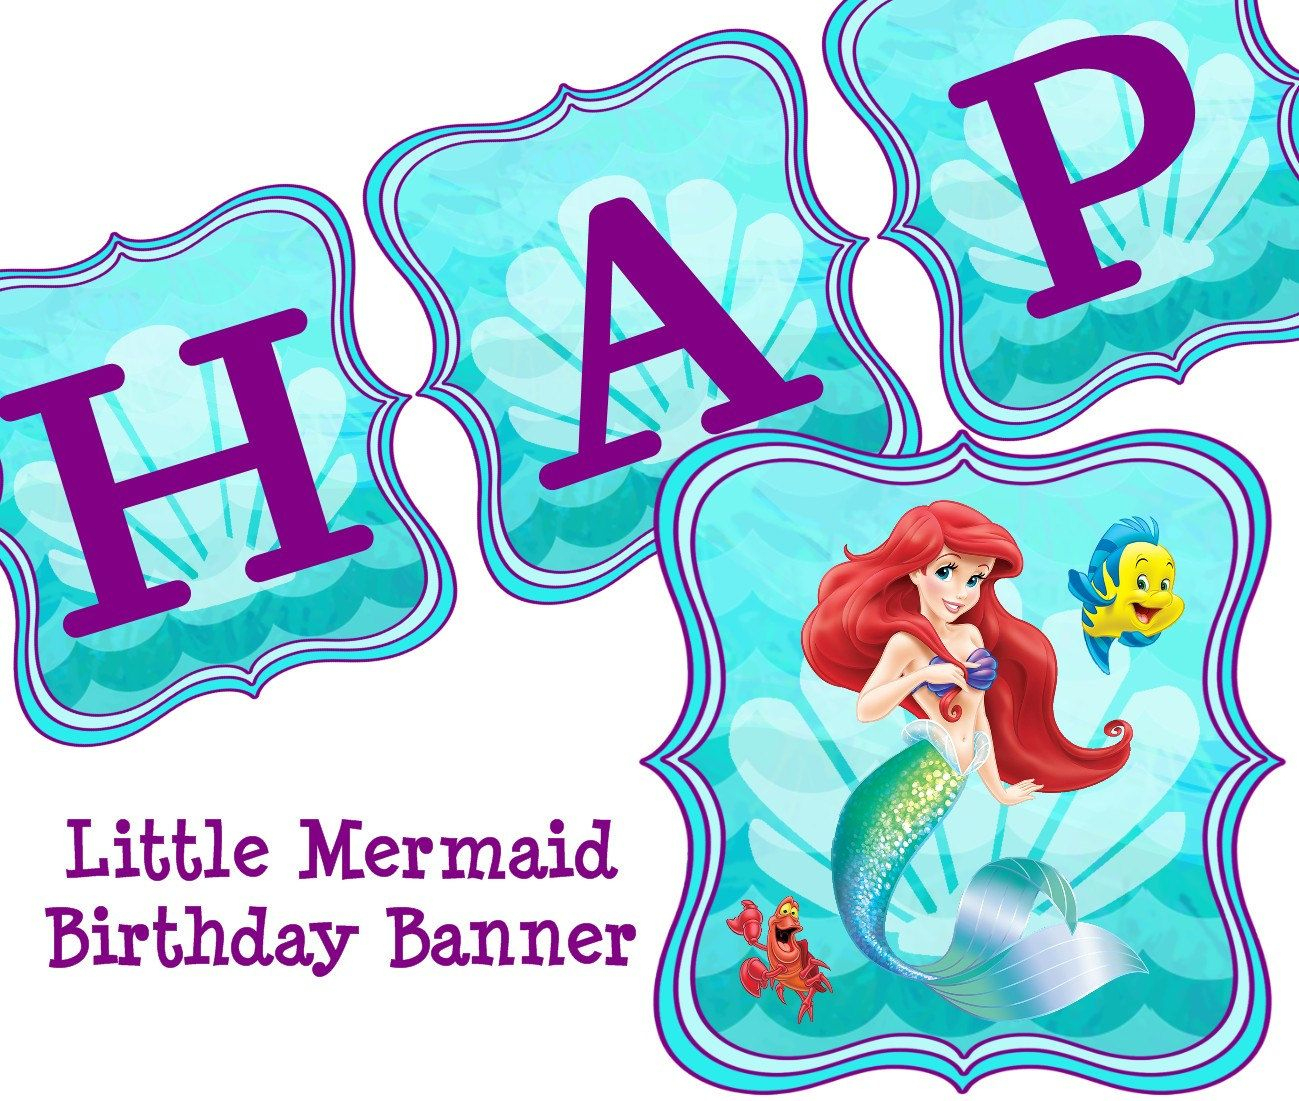 Little Mermaid Free Party Printables - Buscar Con Google | Petite - Free Printable Little Mermaid Birthday Banner